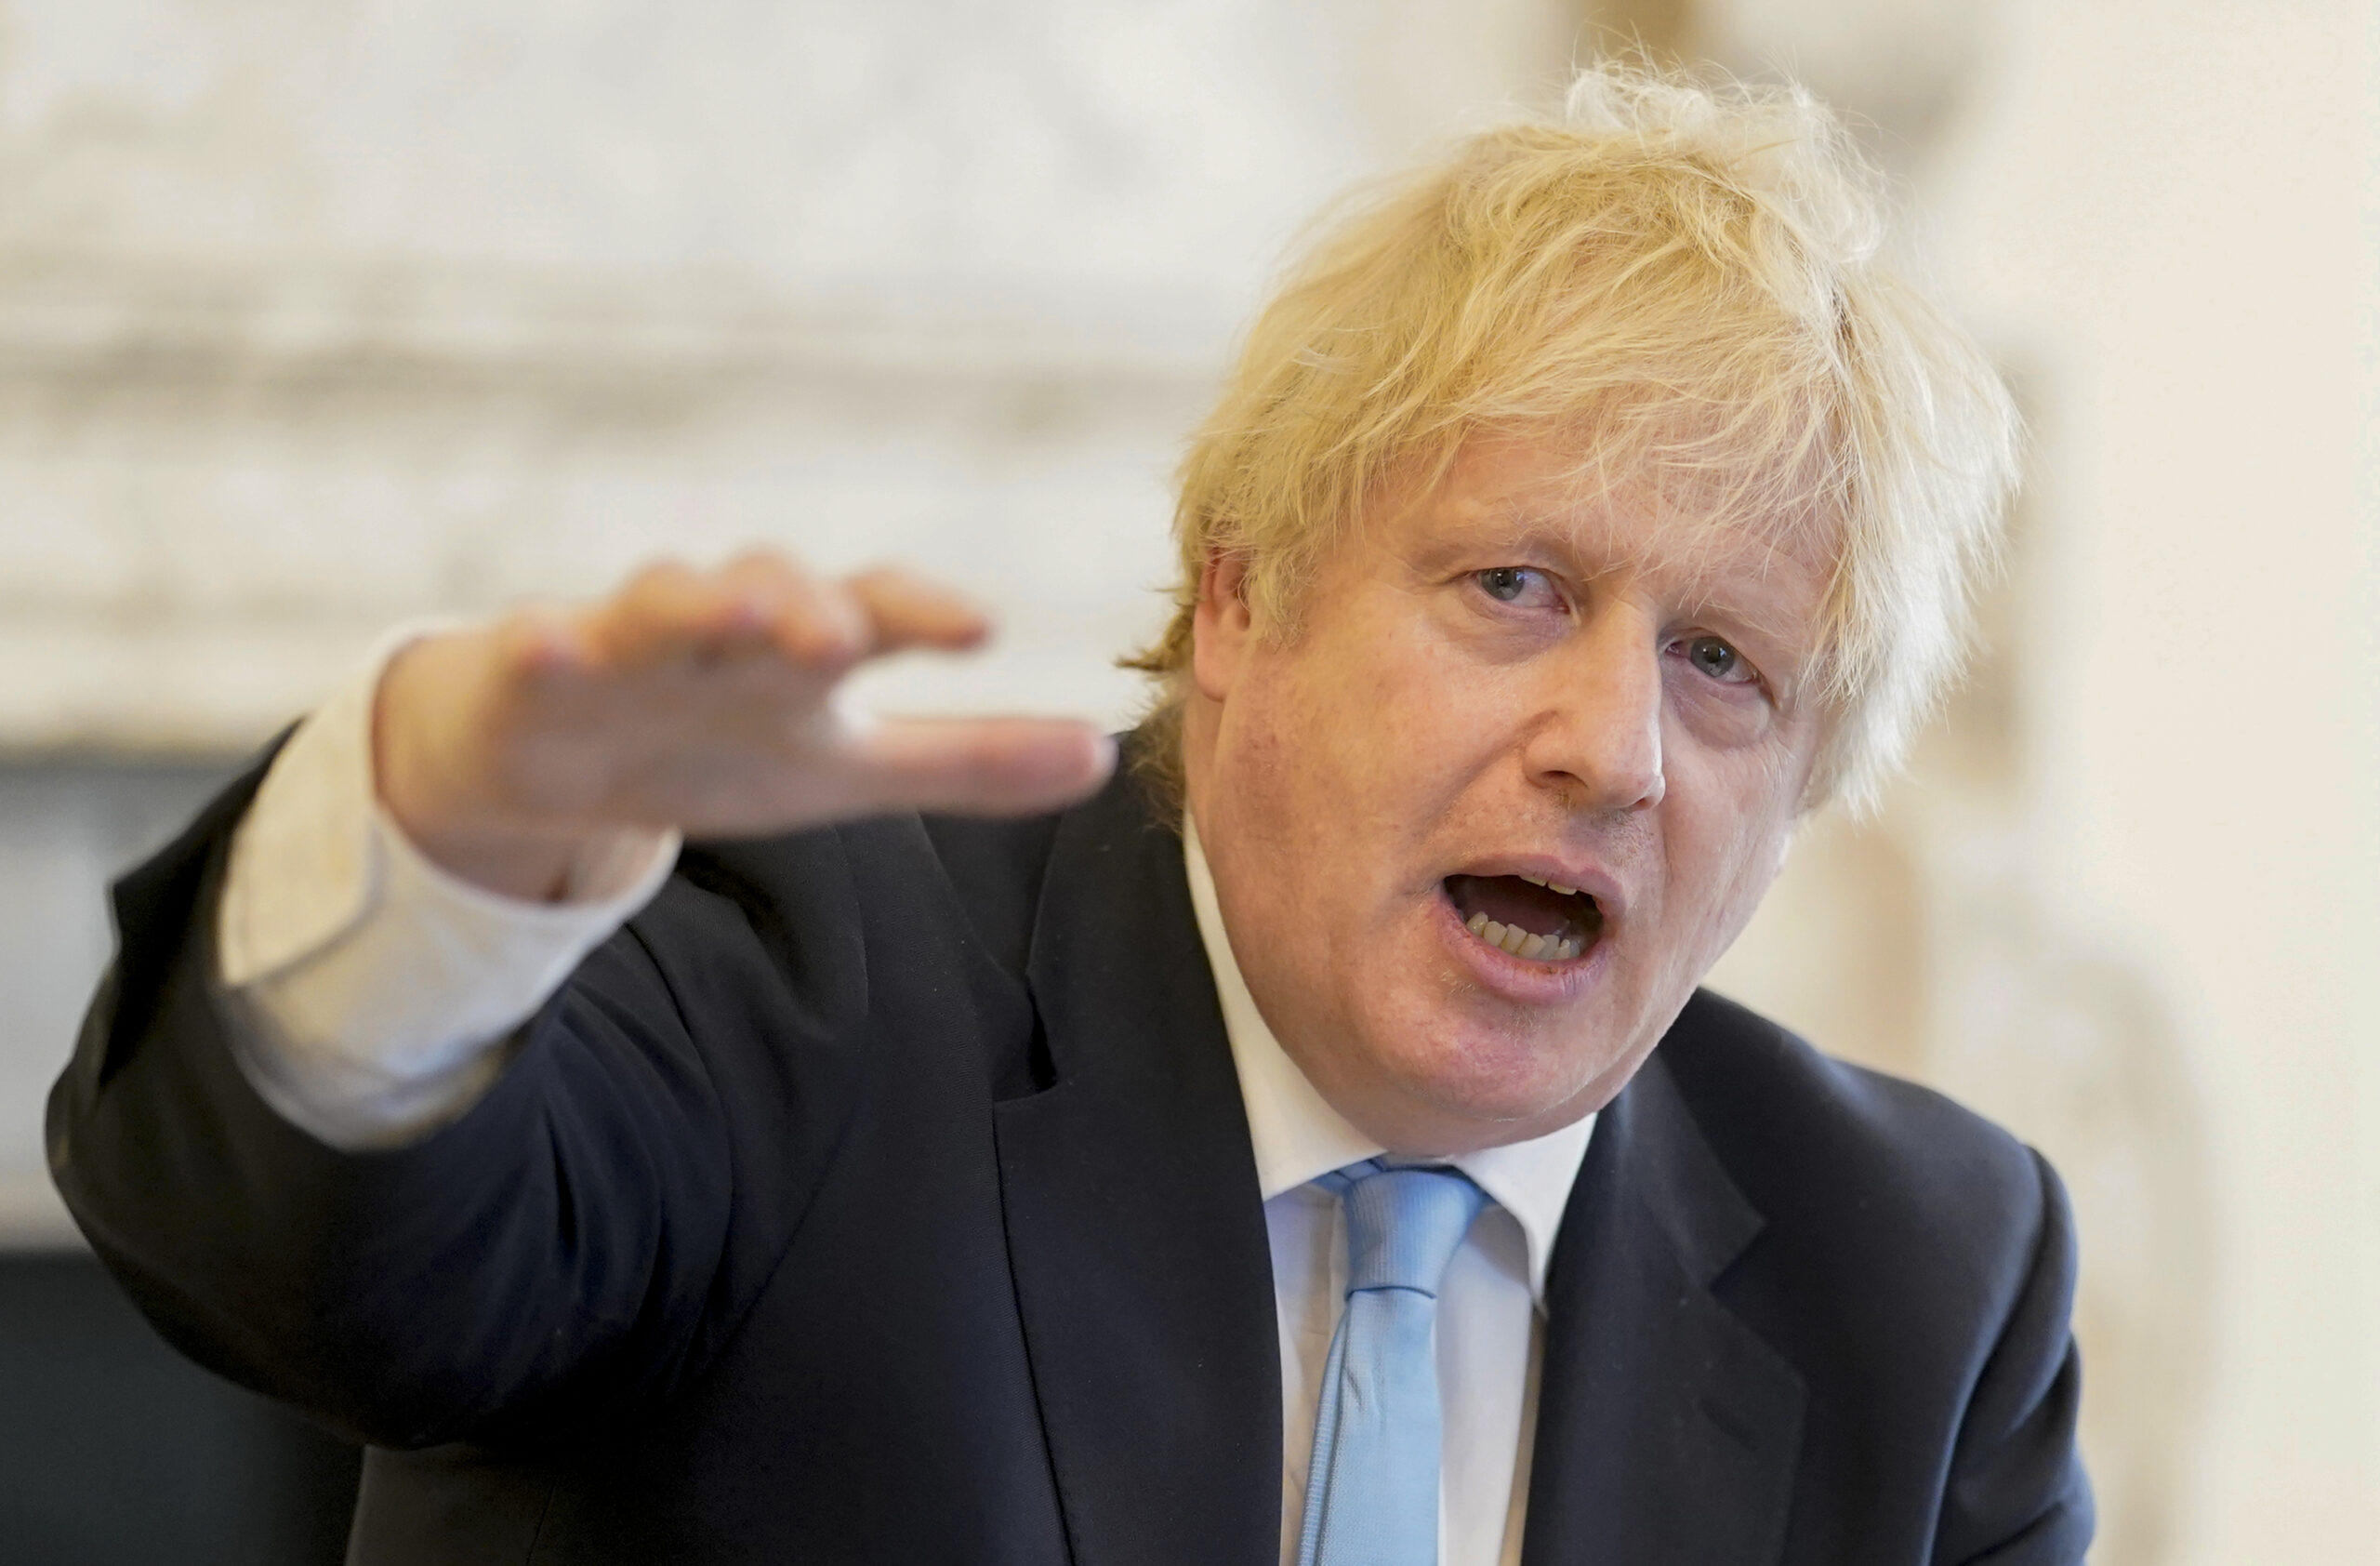 Prime Minister Boris Johnson, mid-speech looking past his slightly raised right hand, wearing a suit with blue tie